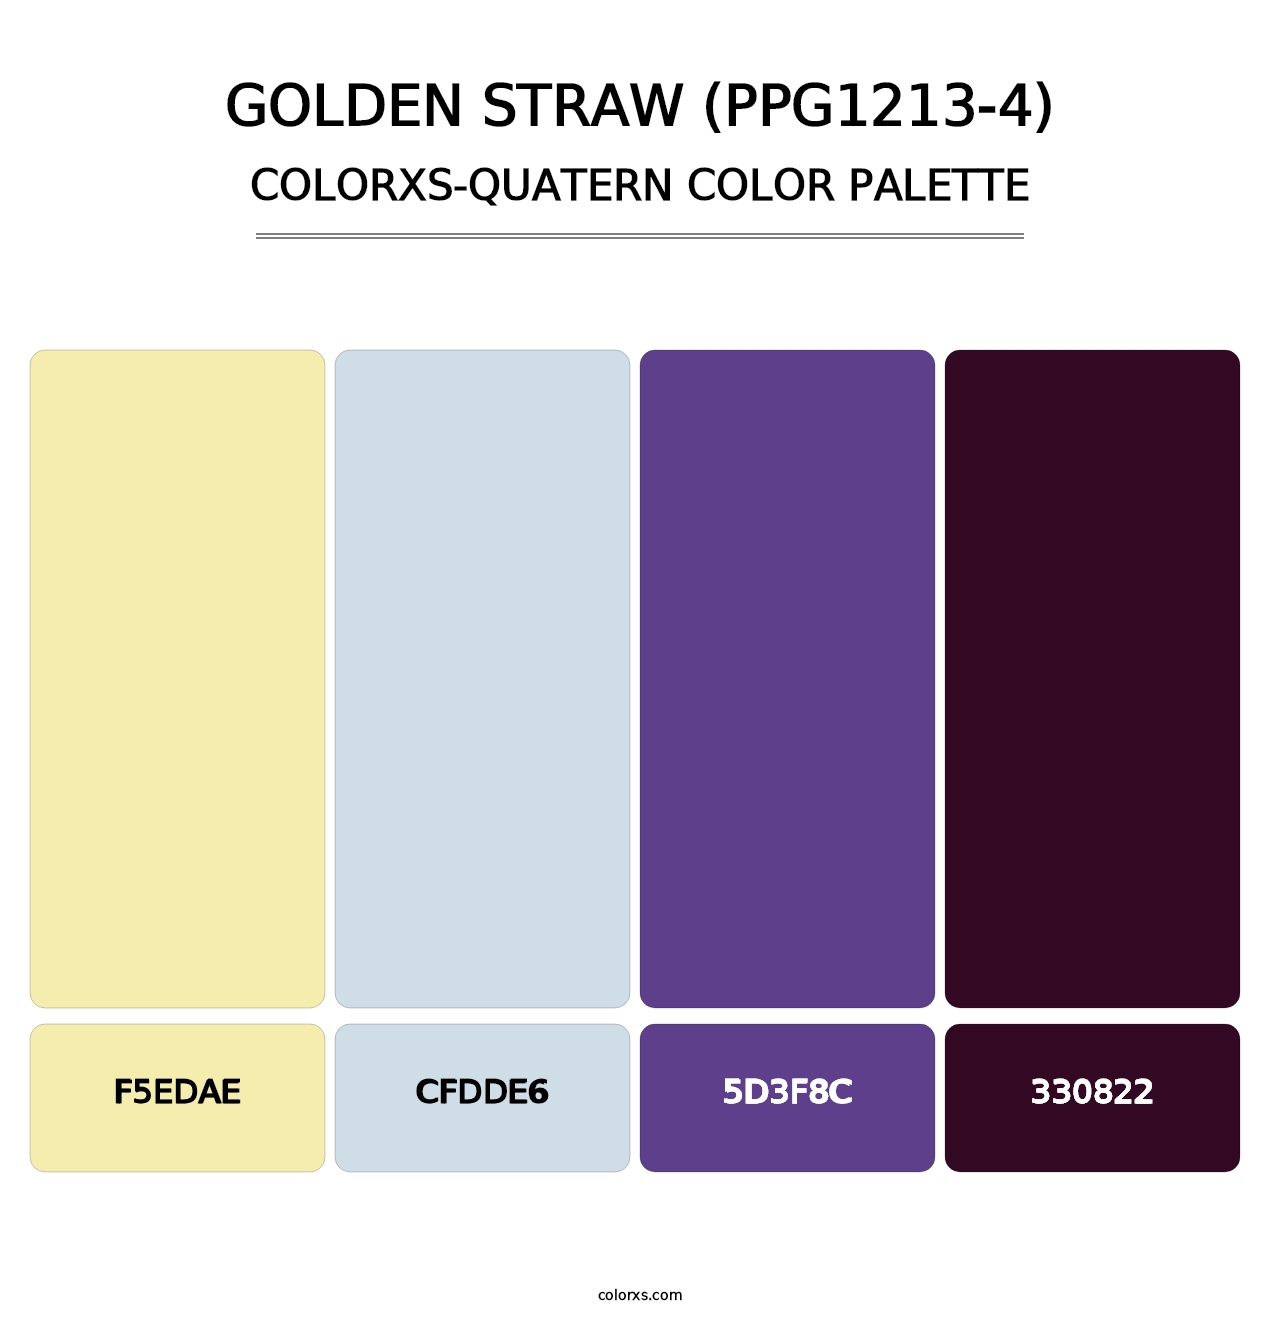 Golden Straw (PPG1213-4) - Colorxs Quatern Palette